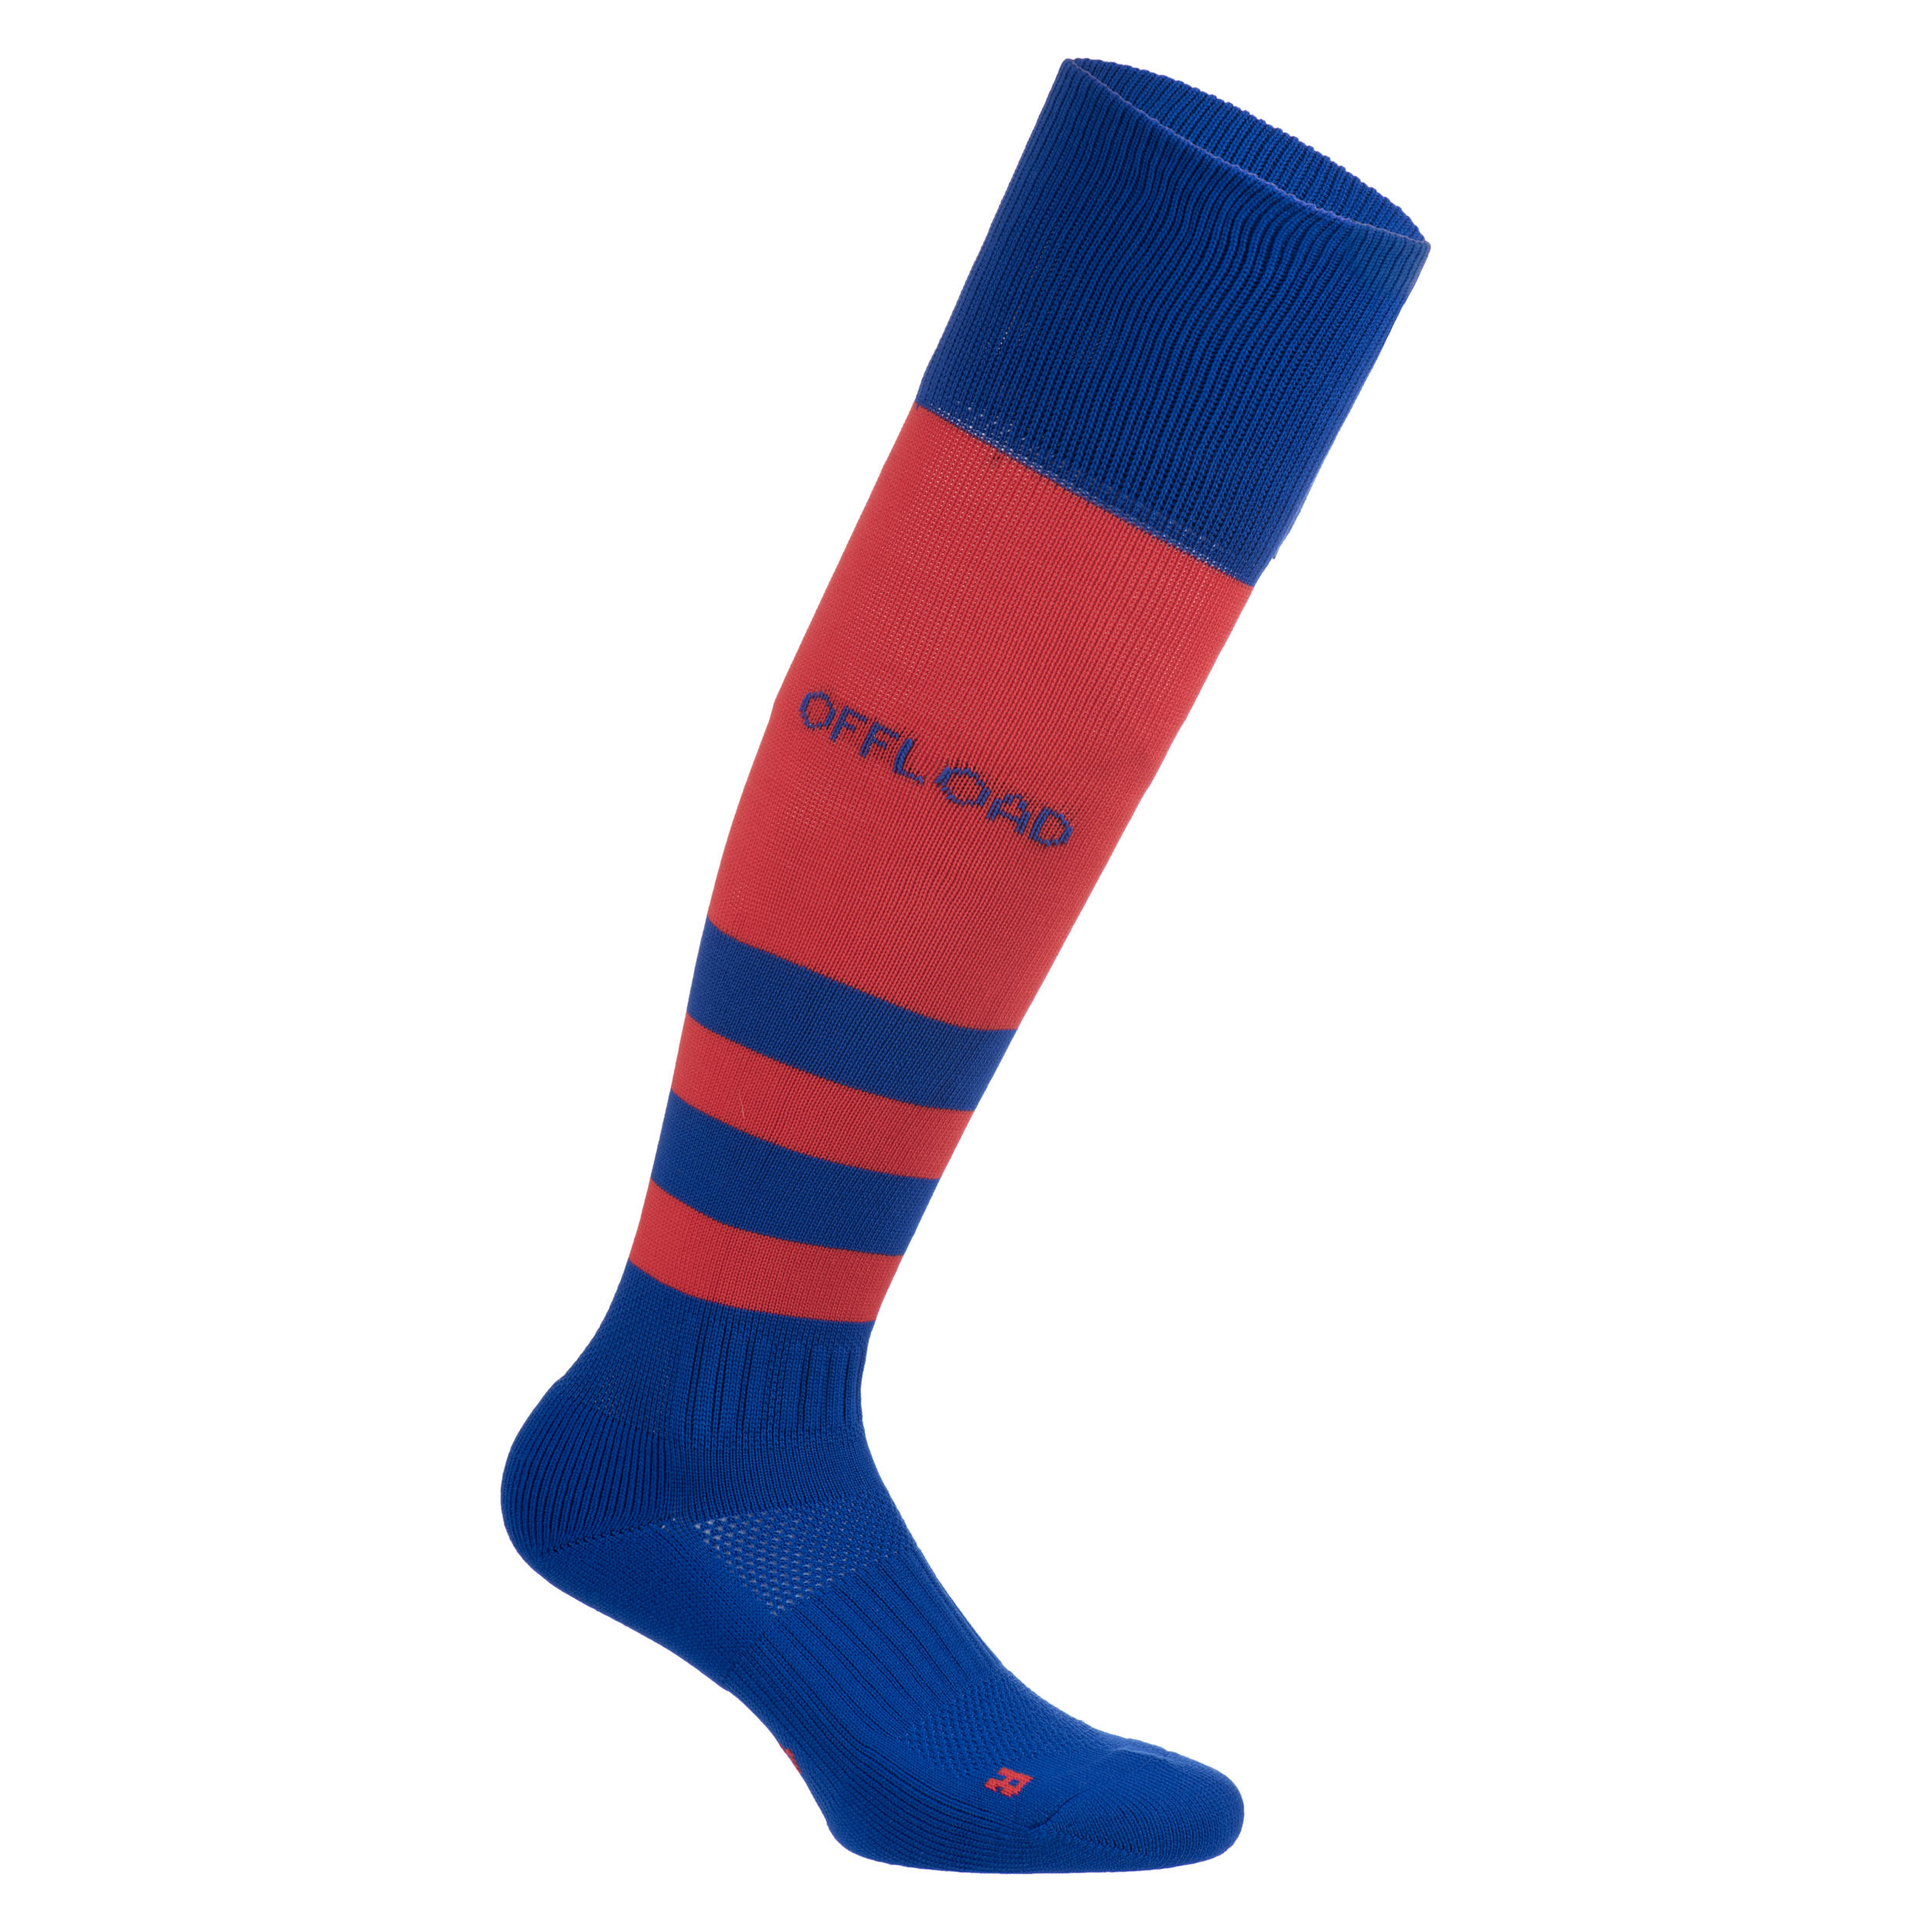 Adult High Rugby Socks R500 - Blue/red